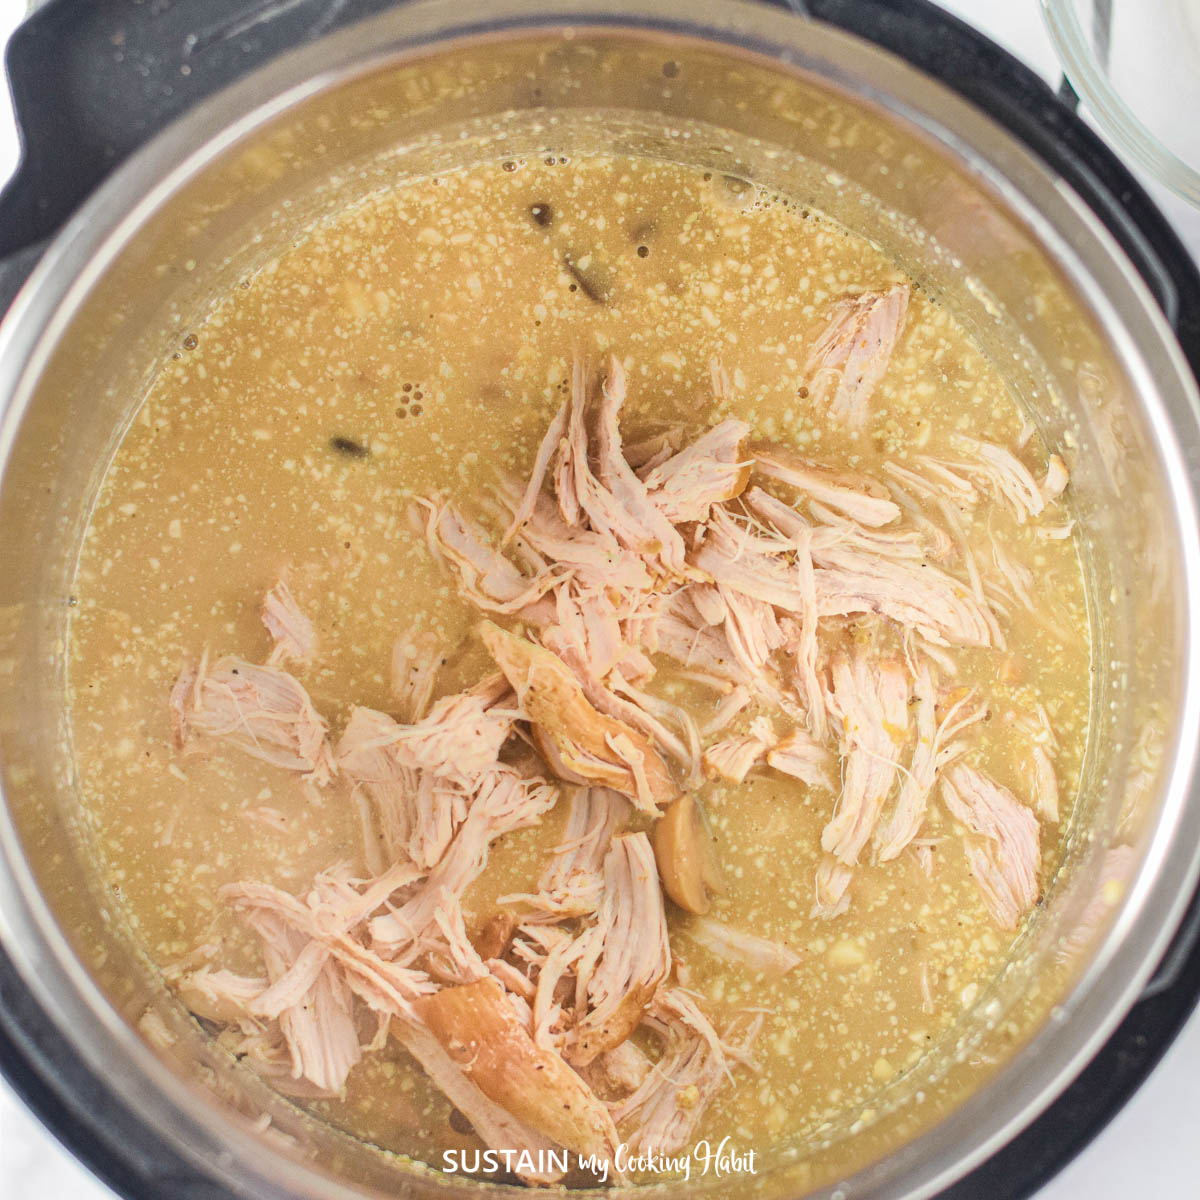 Placing shredded chicken into an Instant Pot